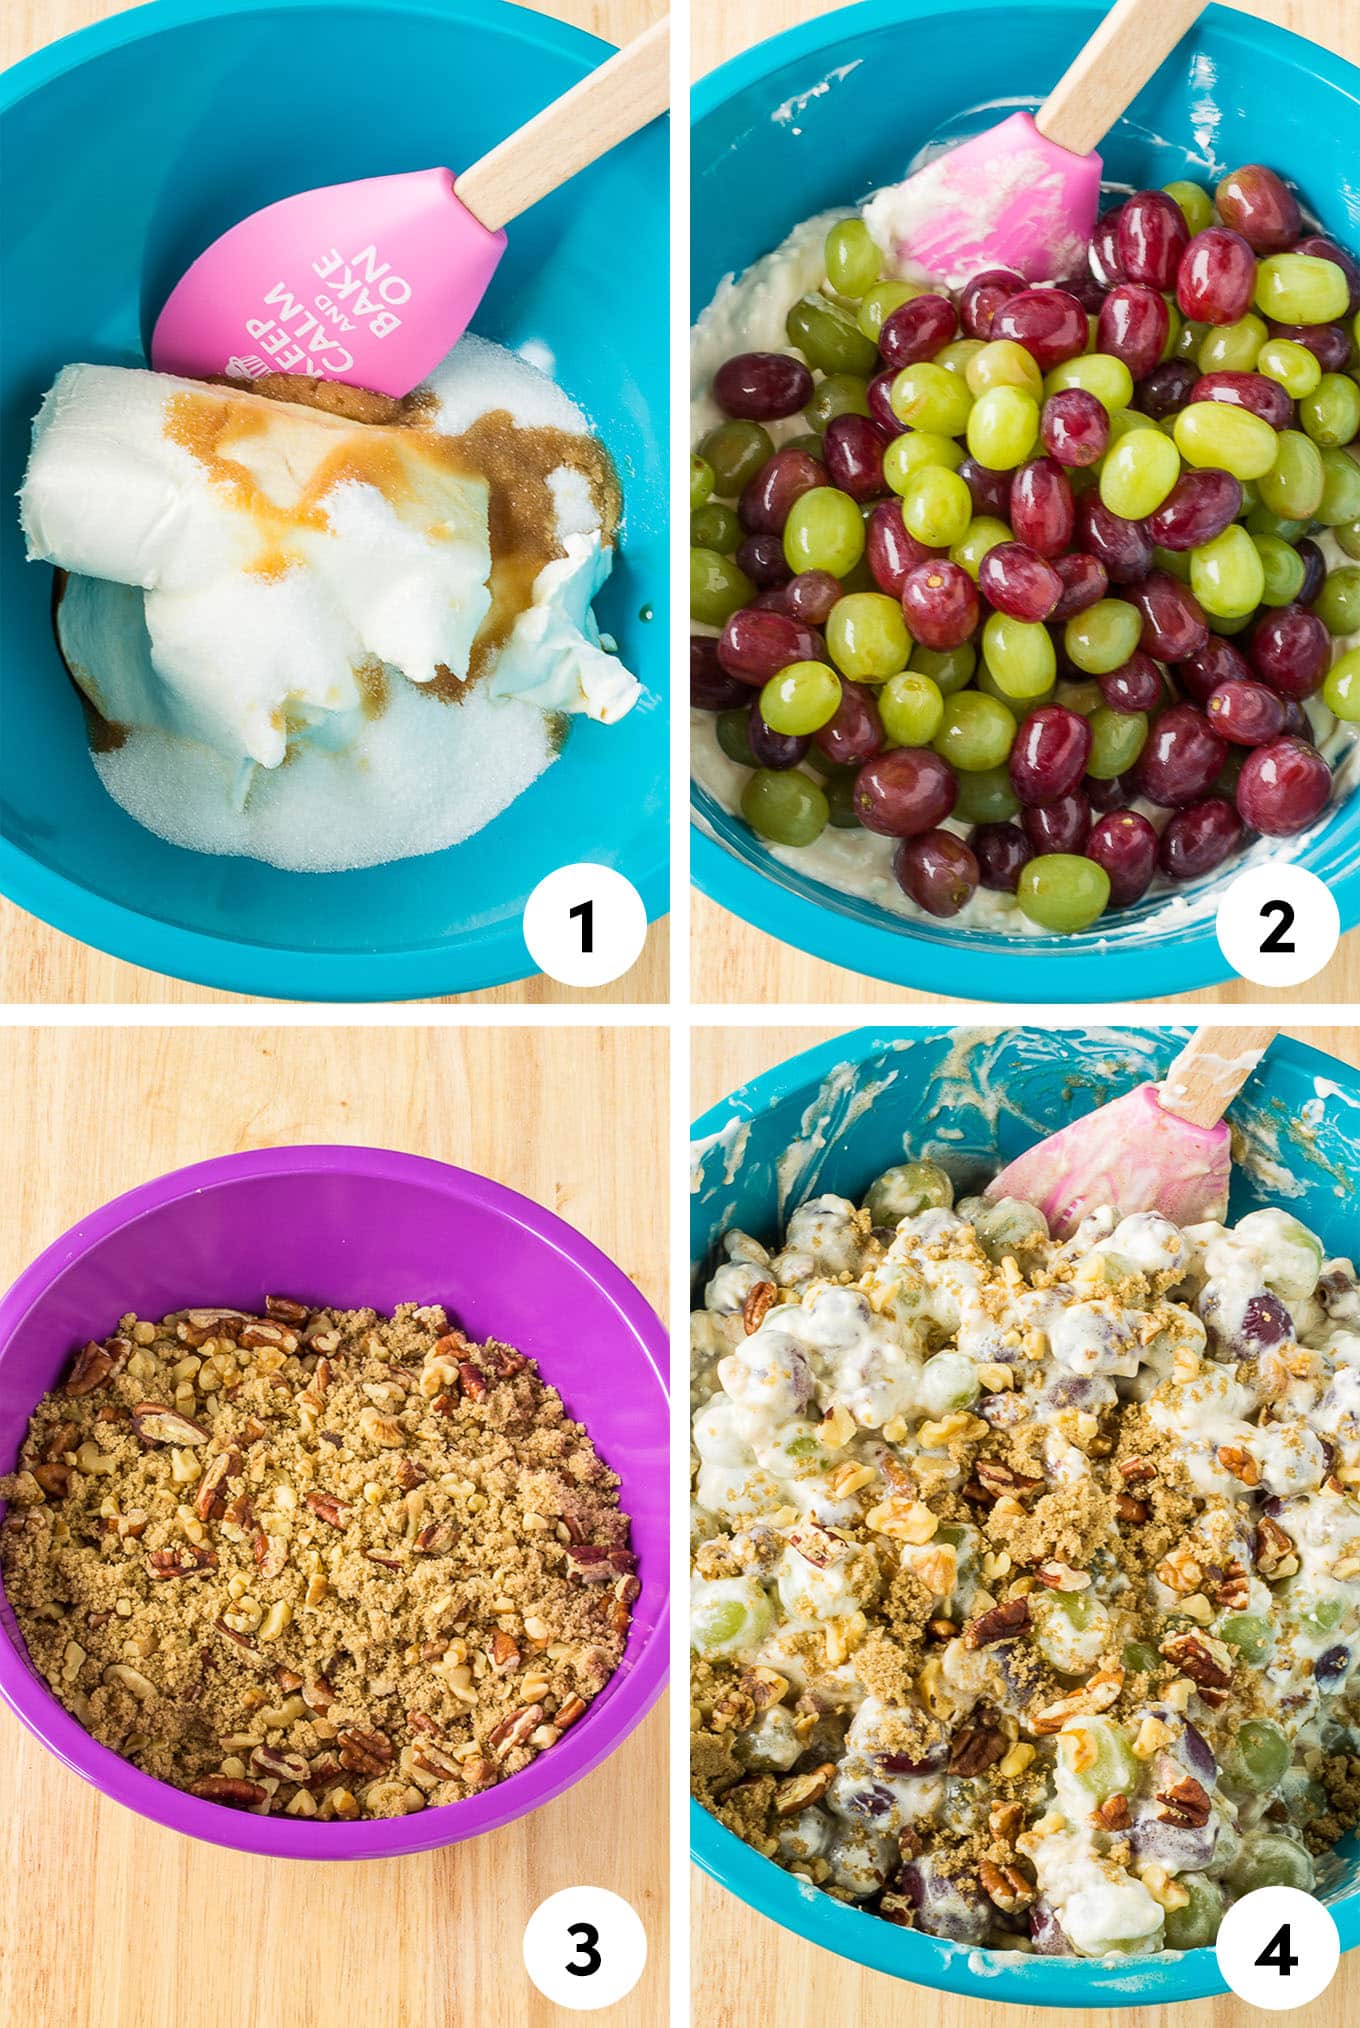 A collage of images showing making grape salad including mixing the creamy base, adding the grapes, and finally the topping.